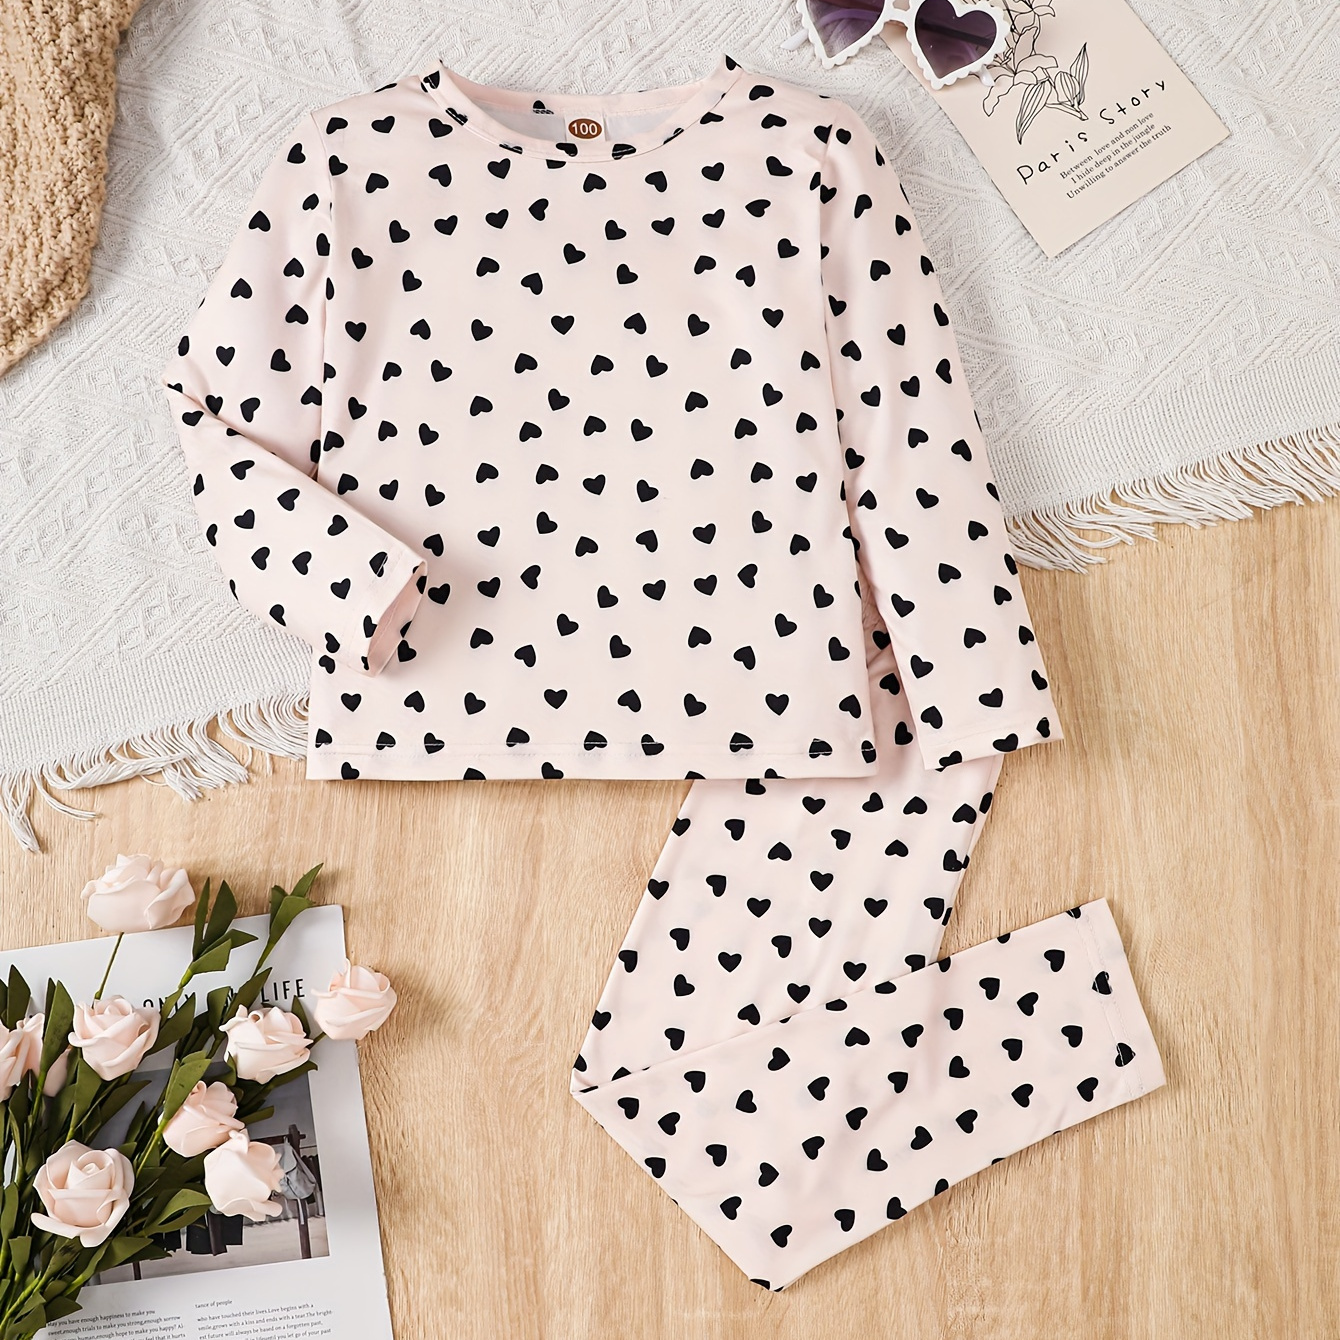 

Ditsy Hearts Pattern 2pcs/set Girls Long Sleeve Top + Pants Co-ords Set - Cute Fashion Girl's Spring/ Fall Outfit